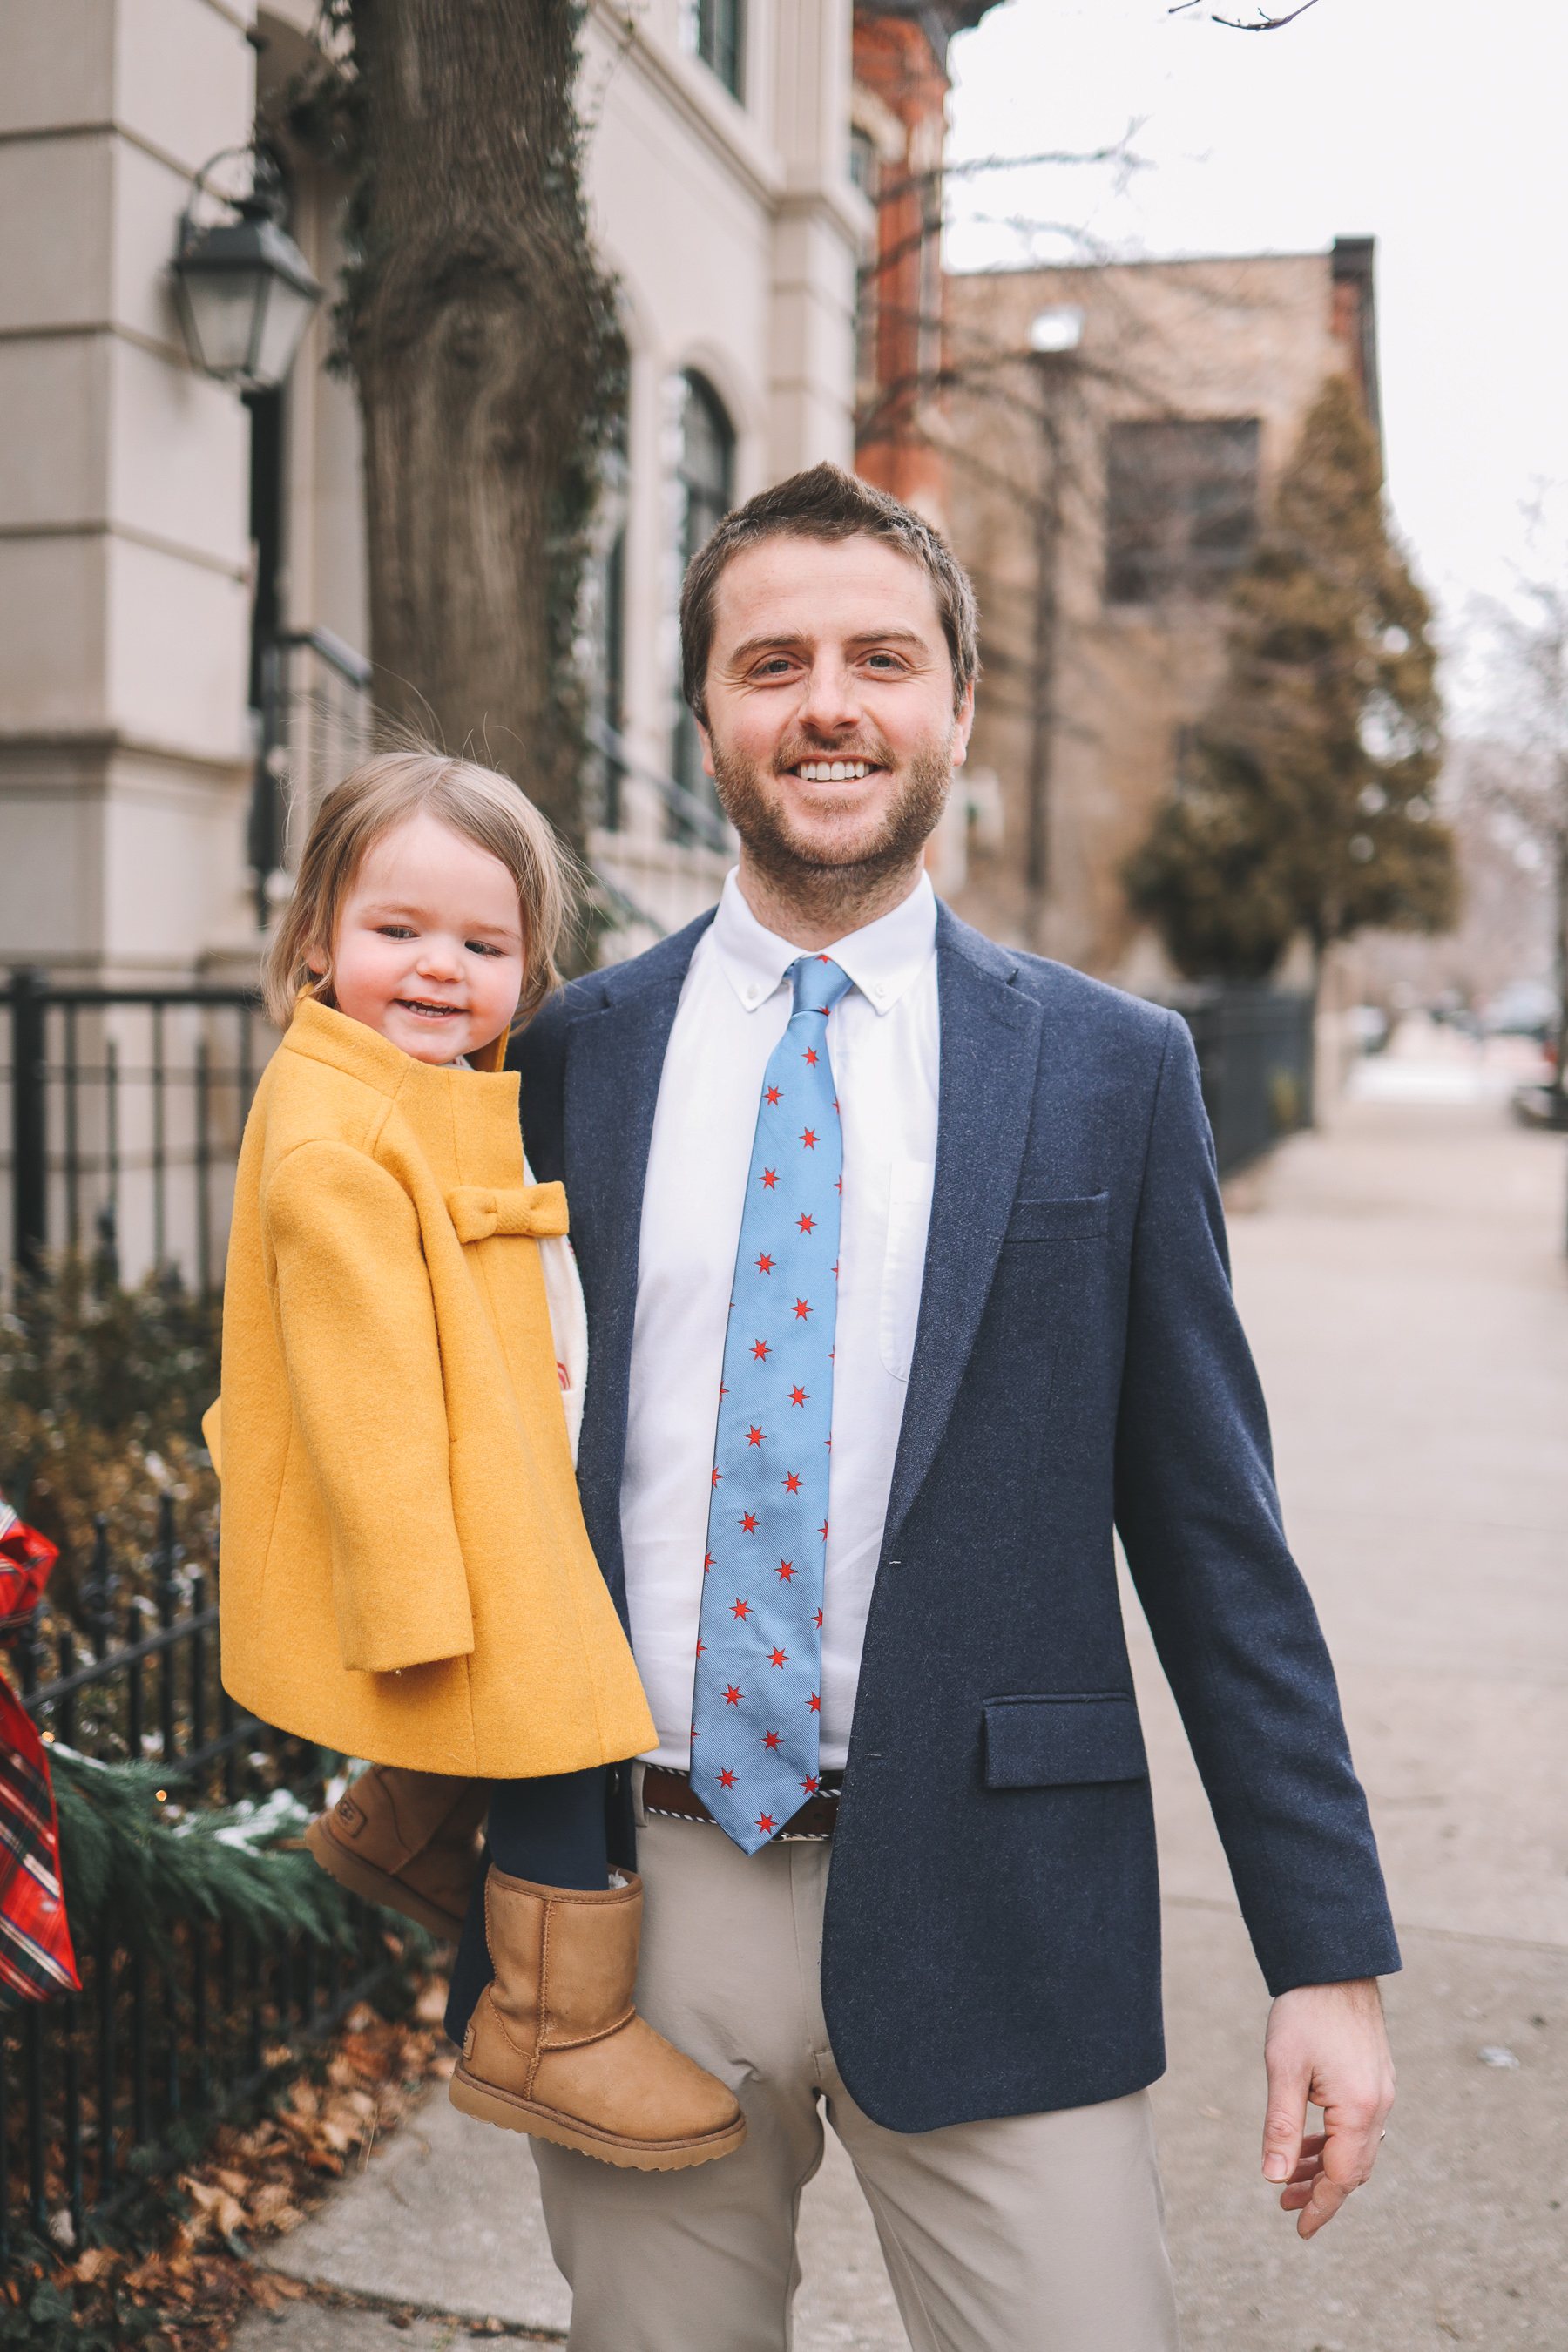 Silk Chicago Ties for a Great Cause